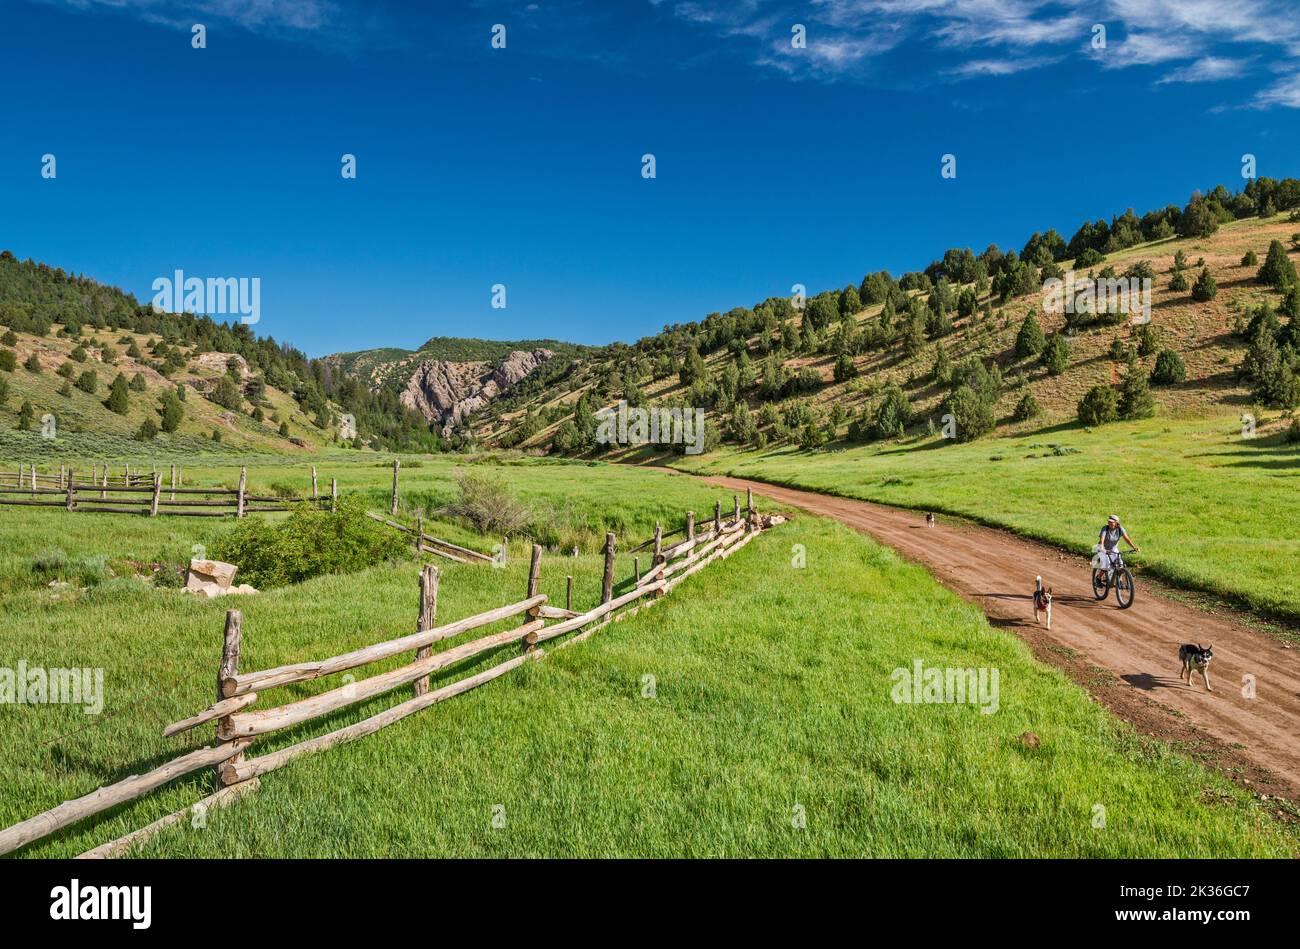 Giovane donna in bicicletta con i suoi tre cani, Rees Valley, Chicken Creek Road, FR 101, San Pitch Mountains, Uinta National Forest, Utah, USA Foto Stock